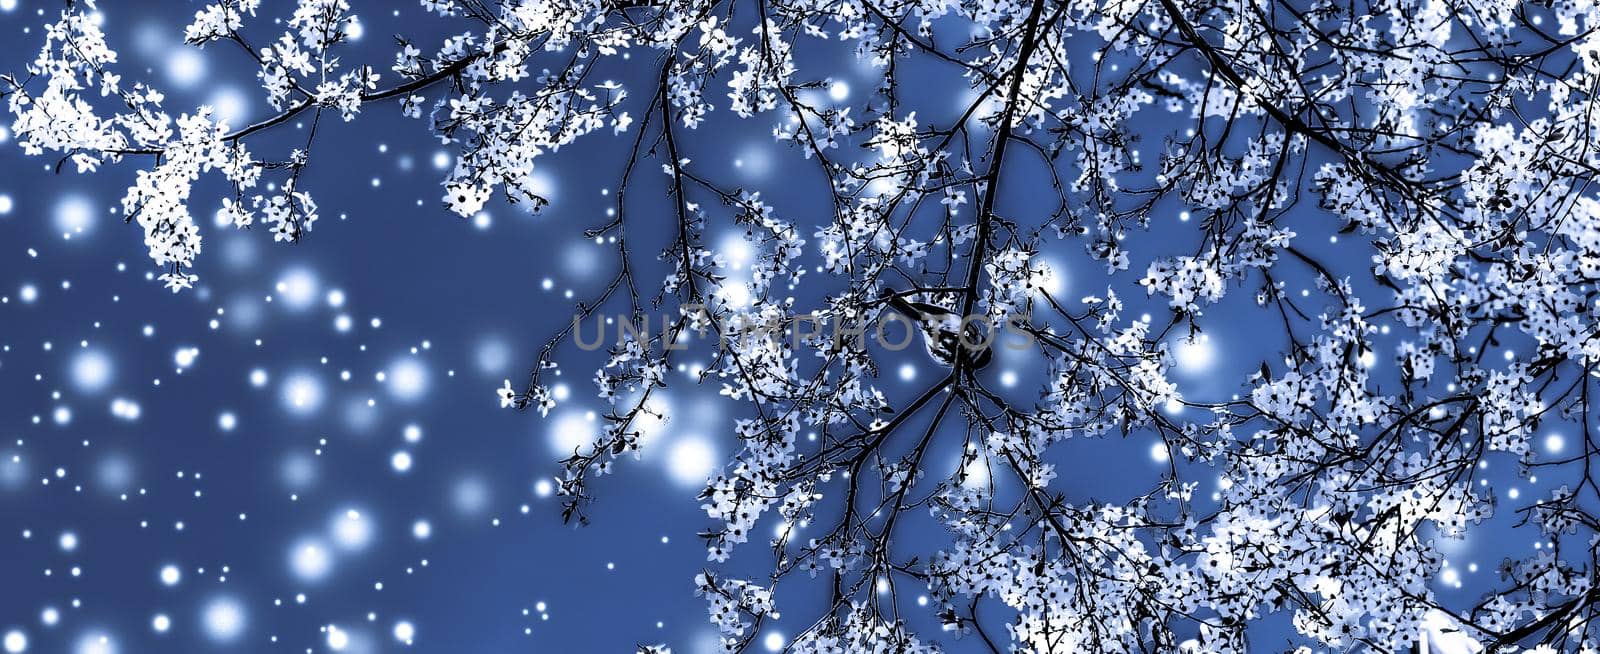 Branding, magic and festive concept - Christmas, New Years blue floral background, holiday card design, flower tree and snow glitter as winter season sale promotion backdrop for luxury beauty brand